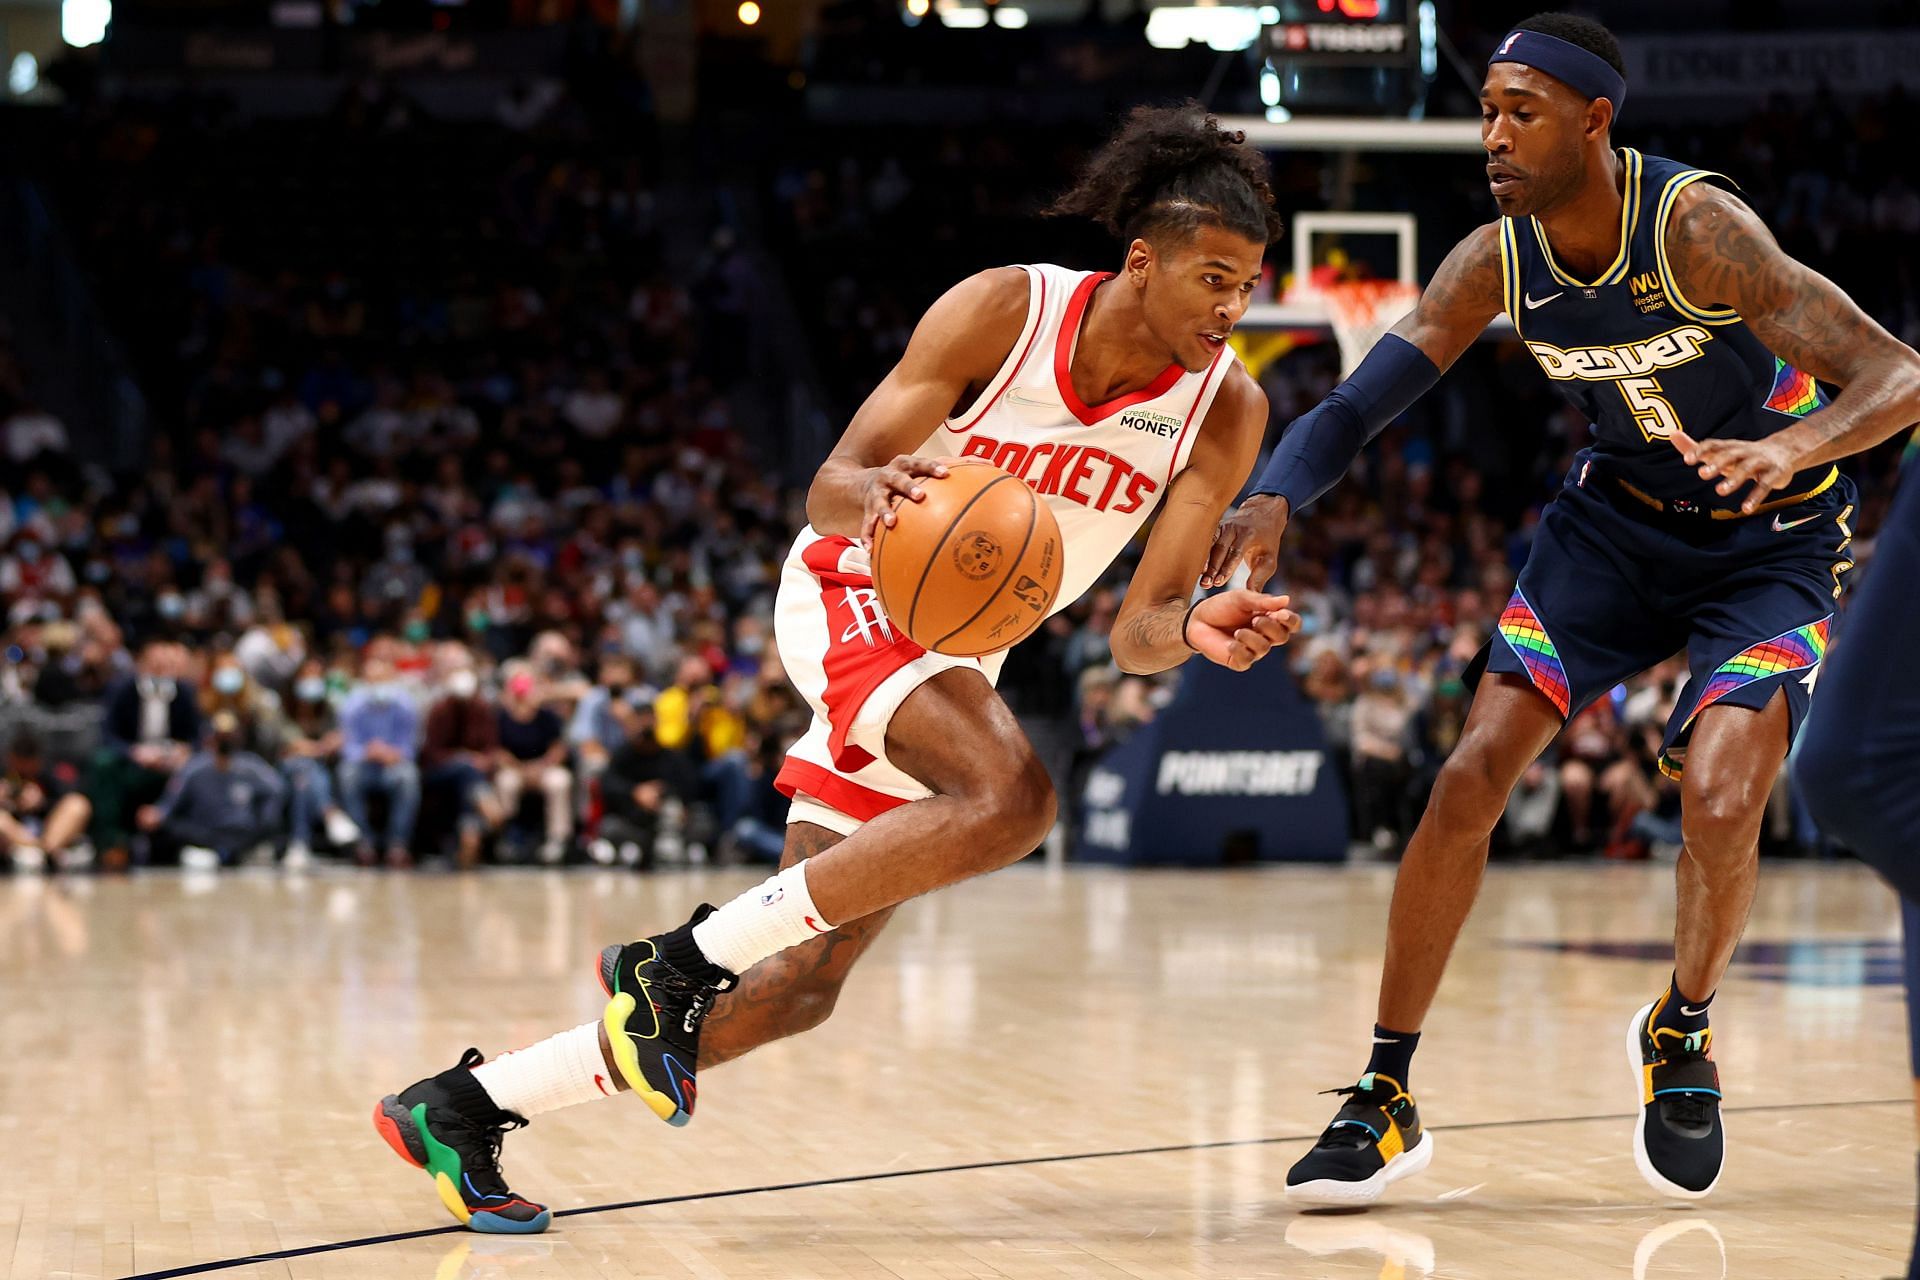 Jalen Green of the Houston Rockets against Will Barton of the Denver Nuggets